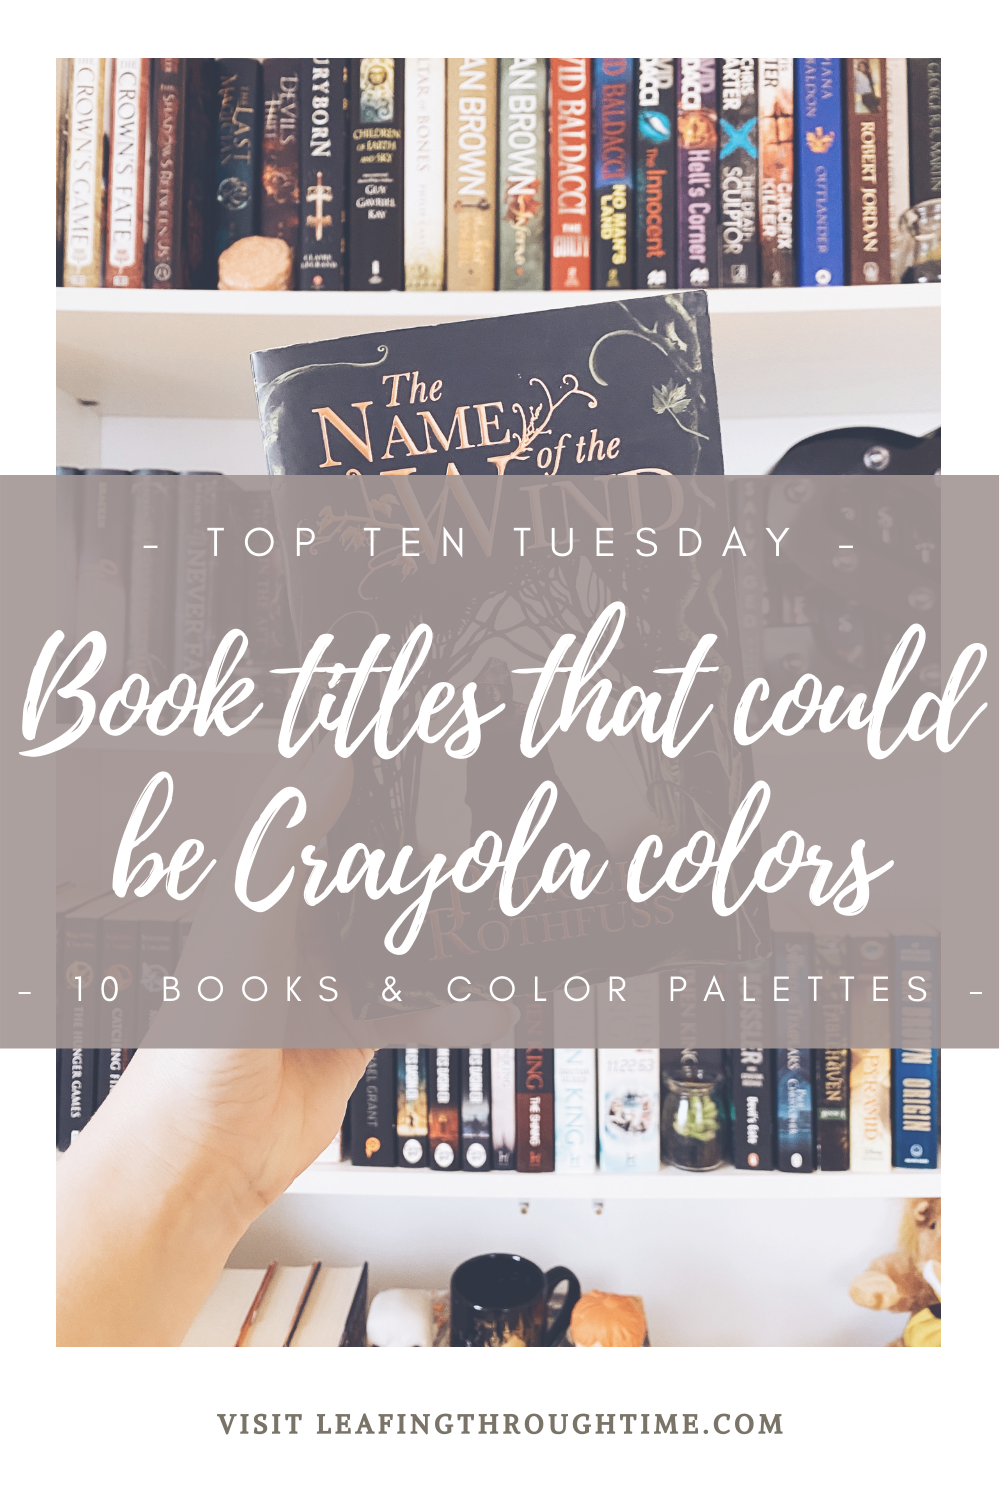 TTT – Book Titles That Could by Crayola Colors